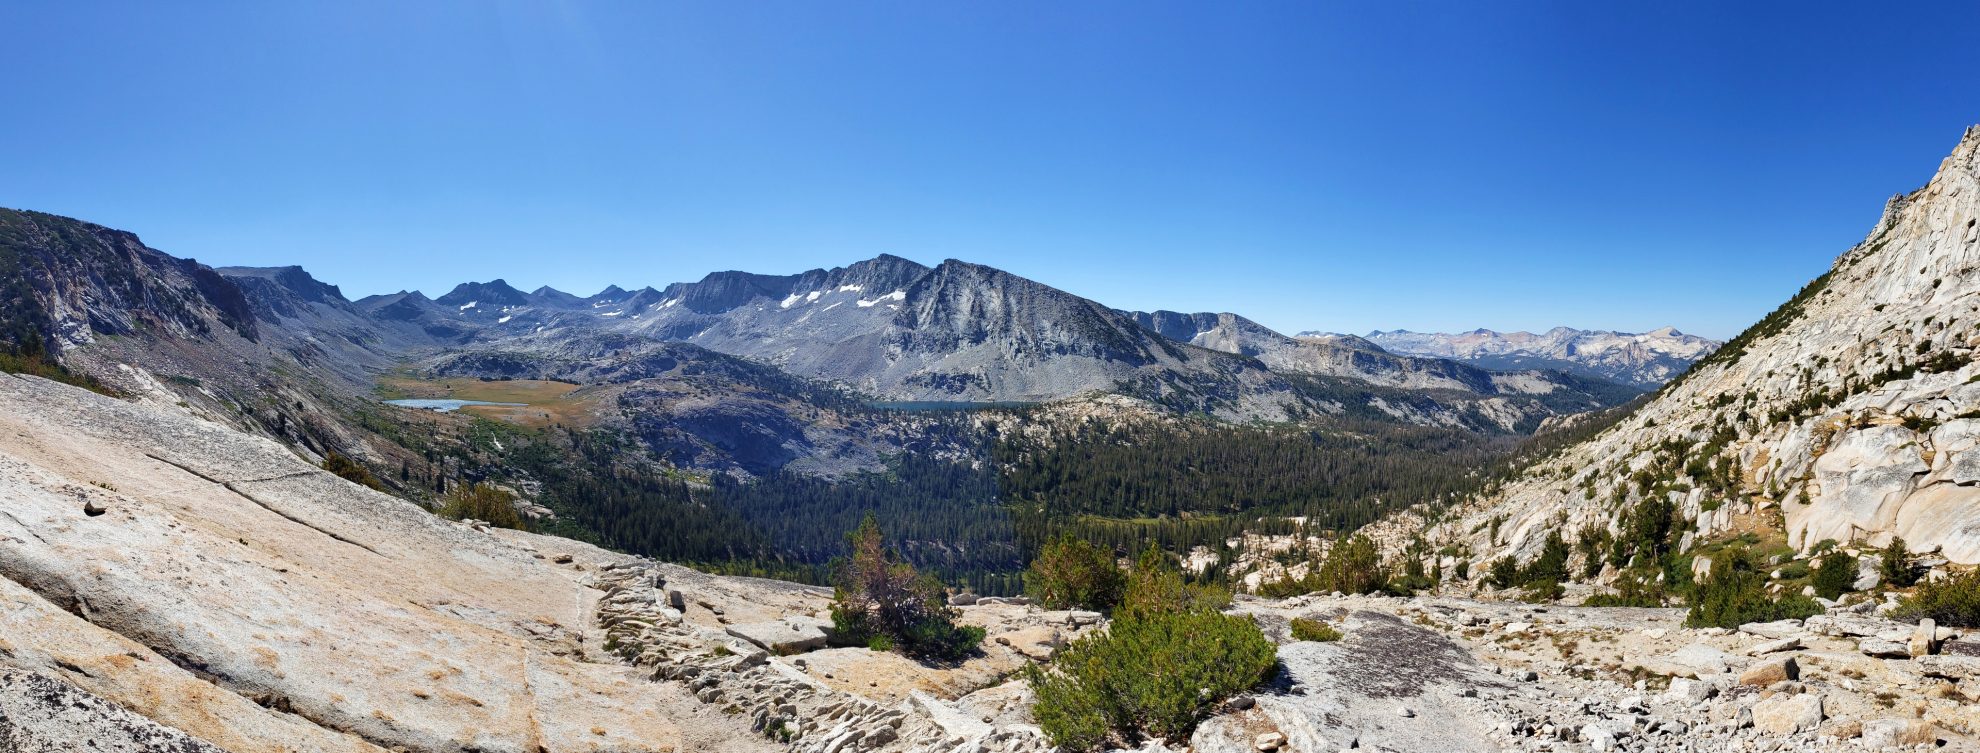 a panoramic view of the mountains and trees